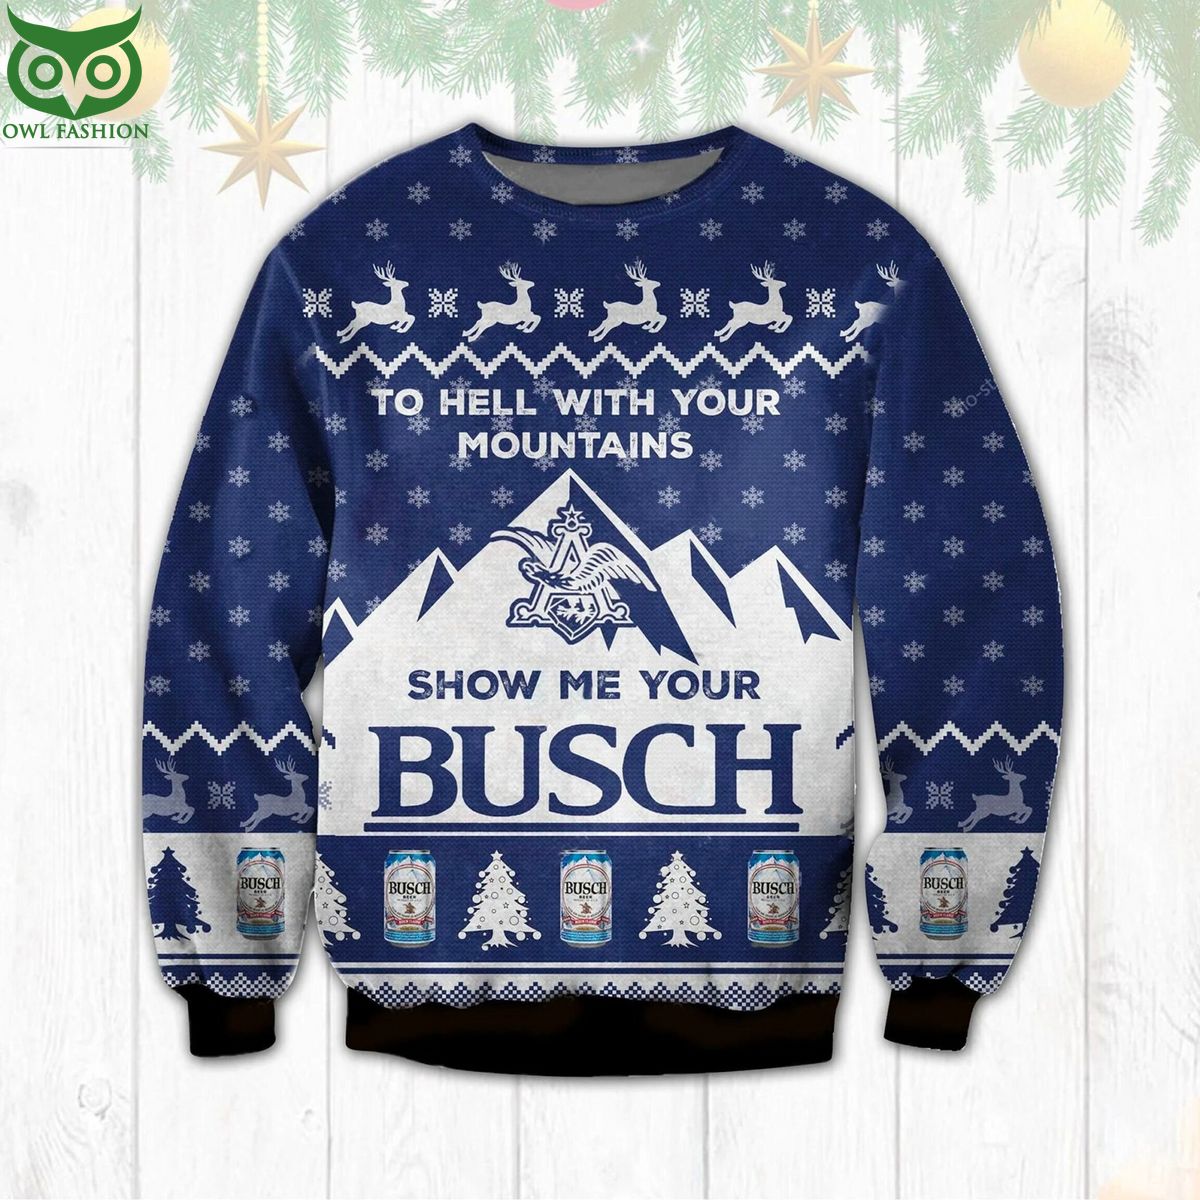 limited busch beer to hell with your mountains ugly christmas sweater 1 Hs2lz.jpg